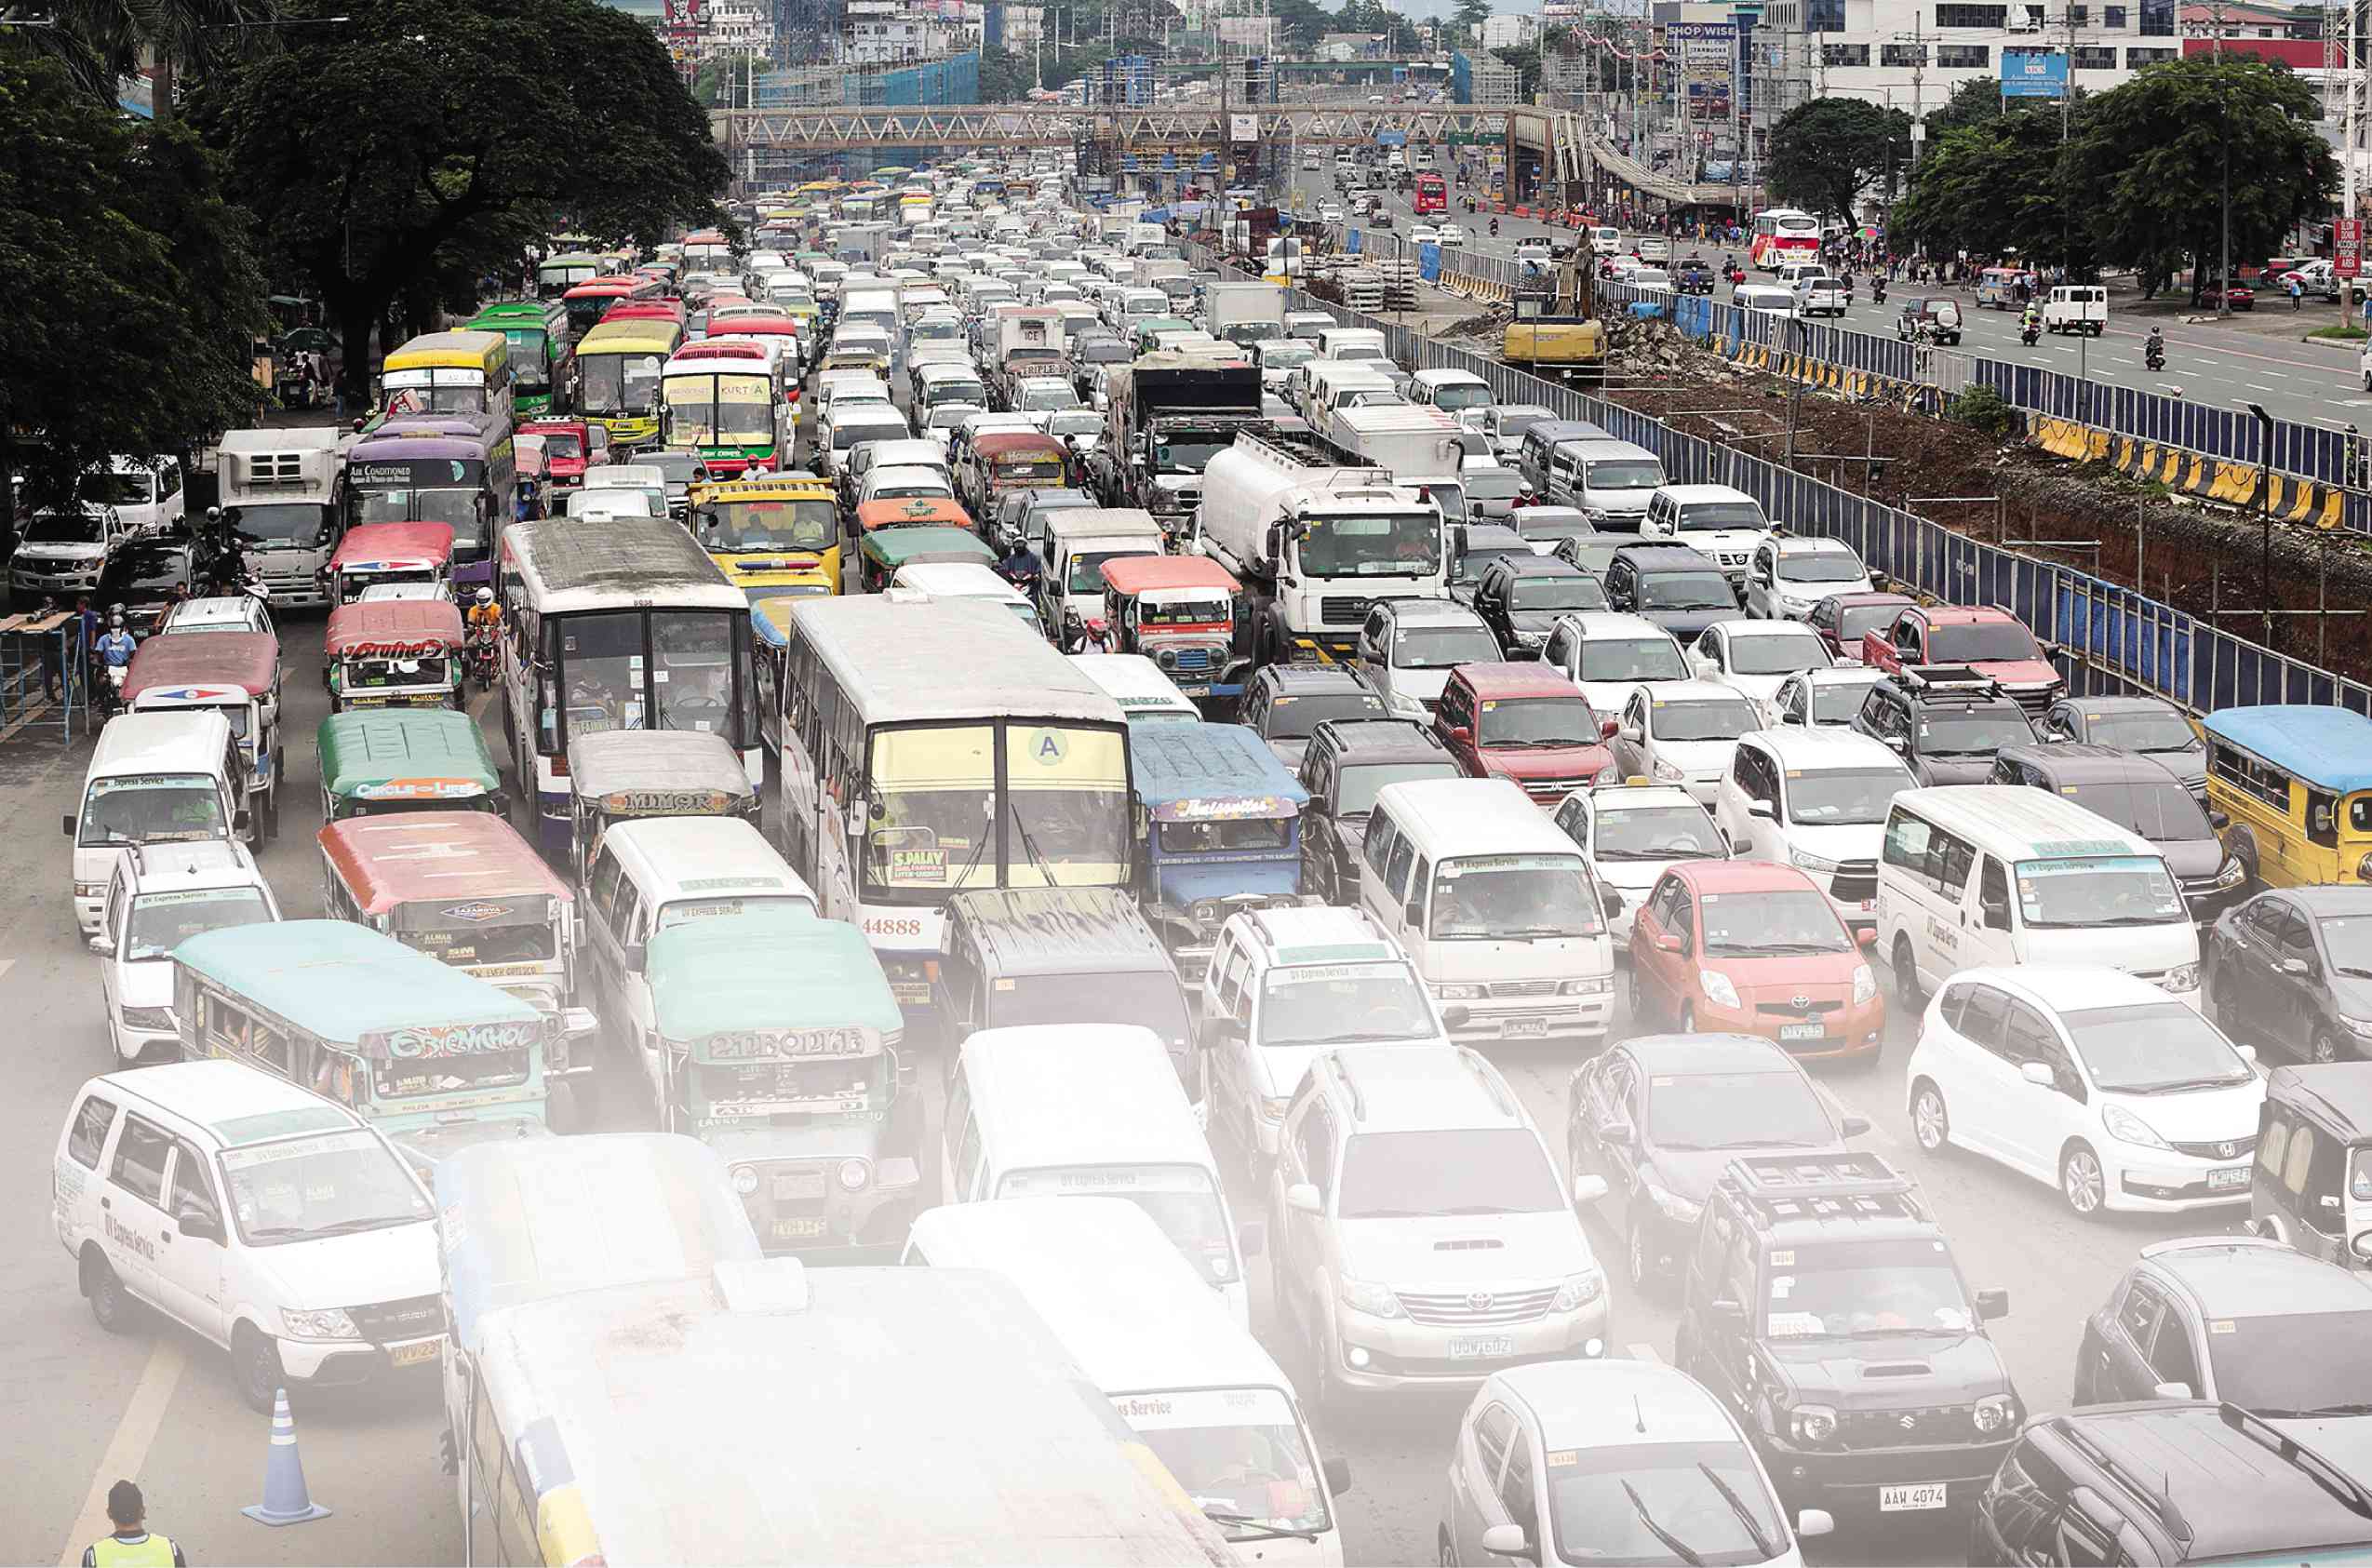 LTFRB urged to consult public, drivers on traffic policies